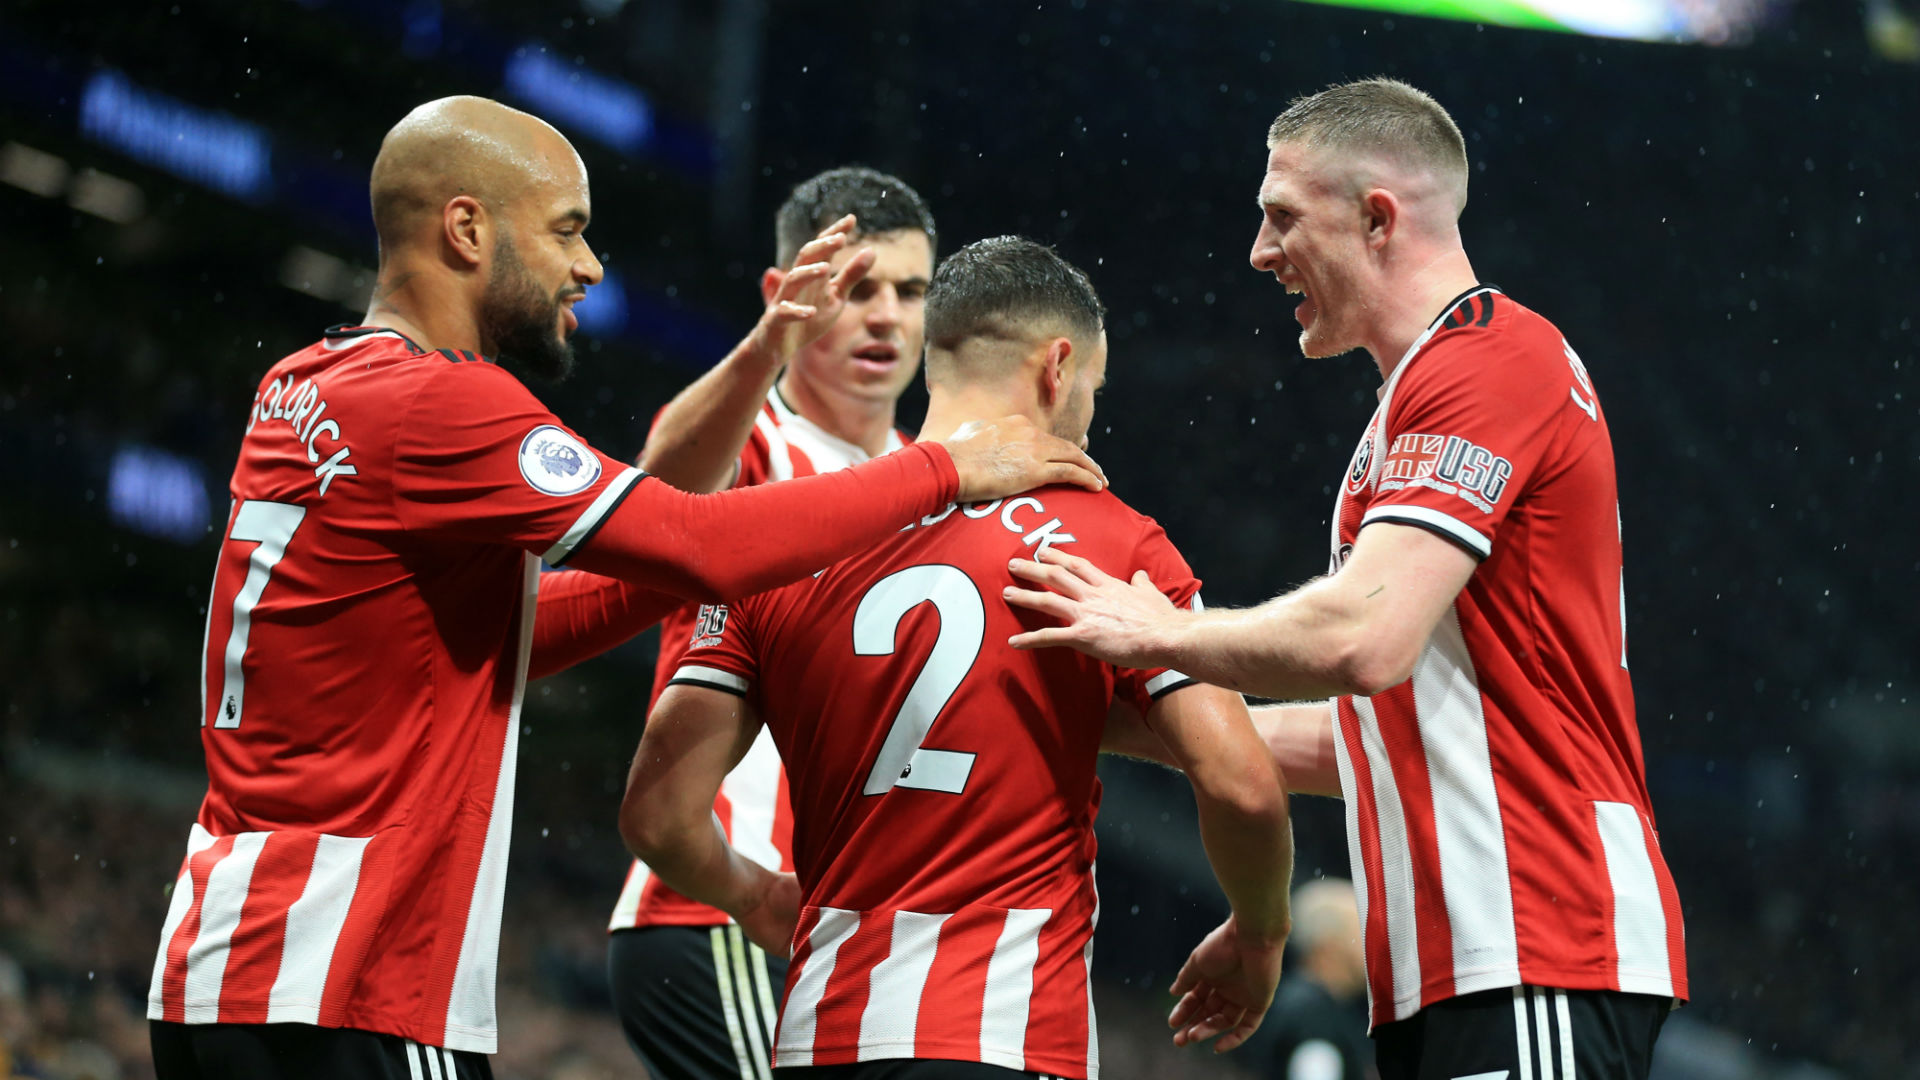 Tottenham were the benefactors of another harsh VAR call on Saturday, but Sheffield United fought back while Chelsea saw off Crystal Palace.